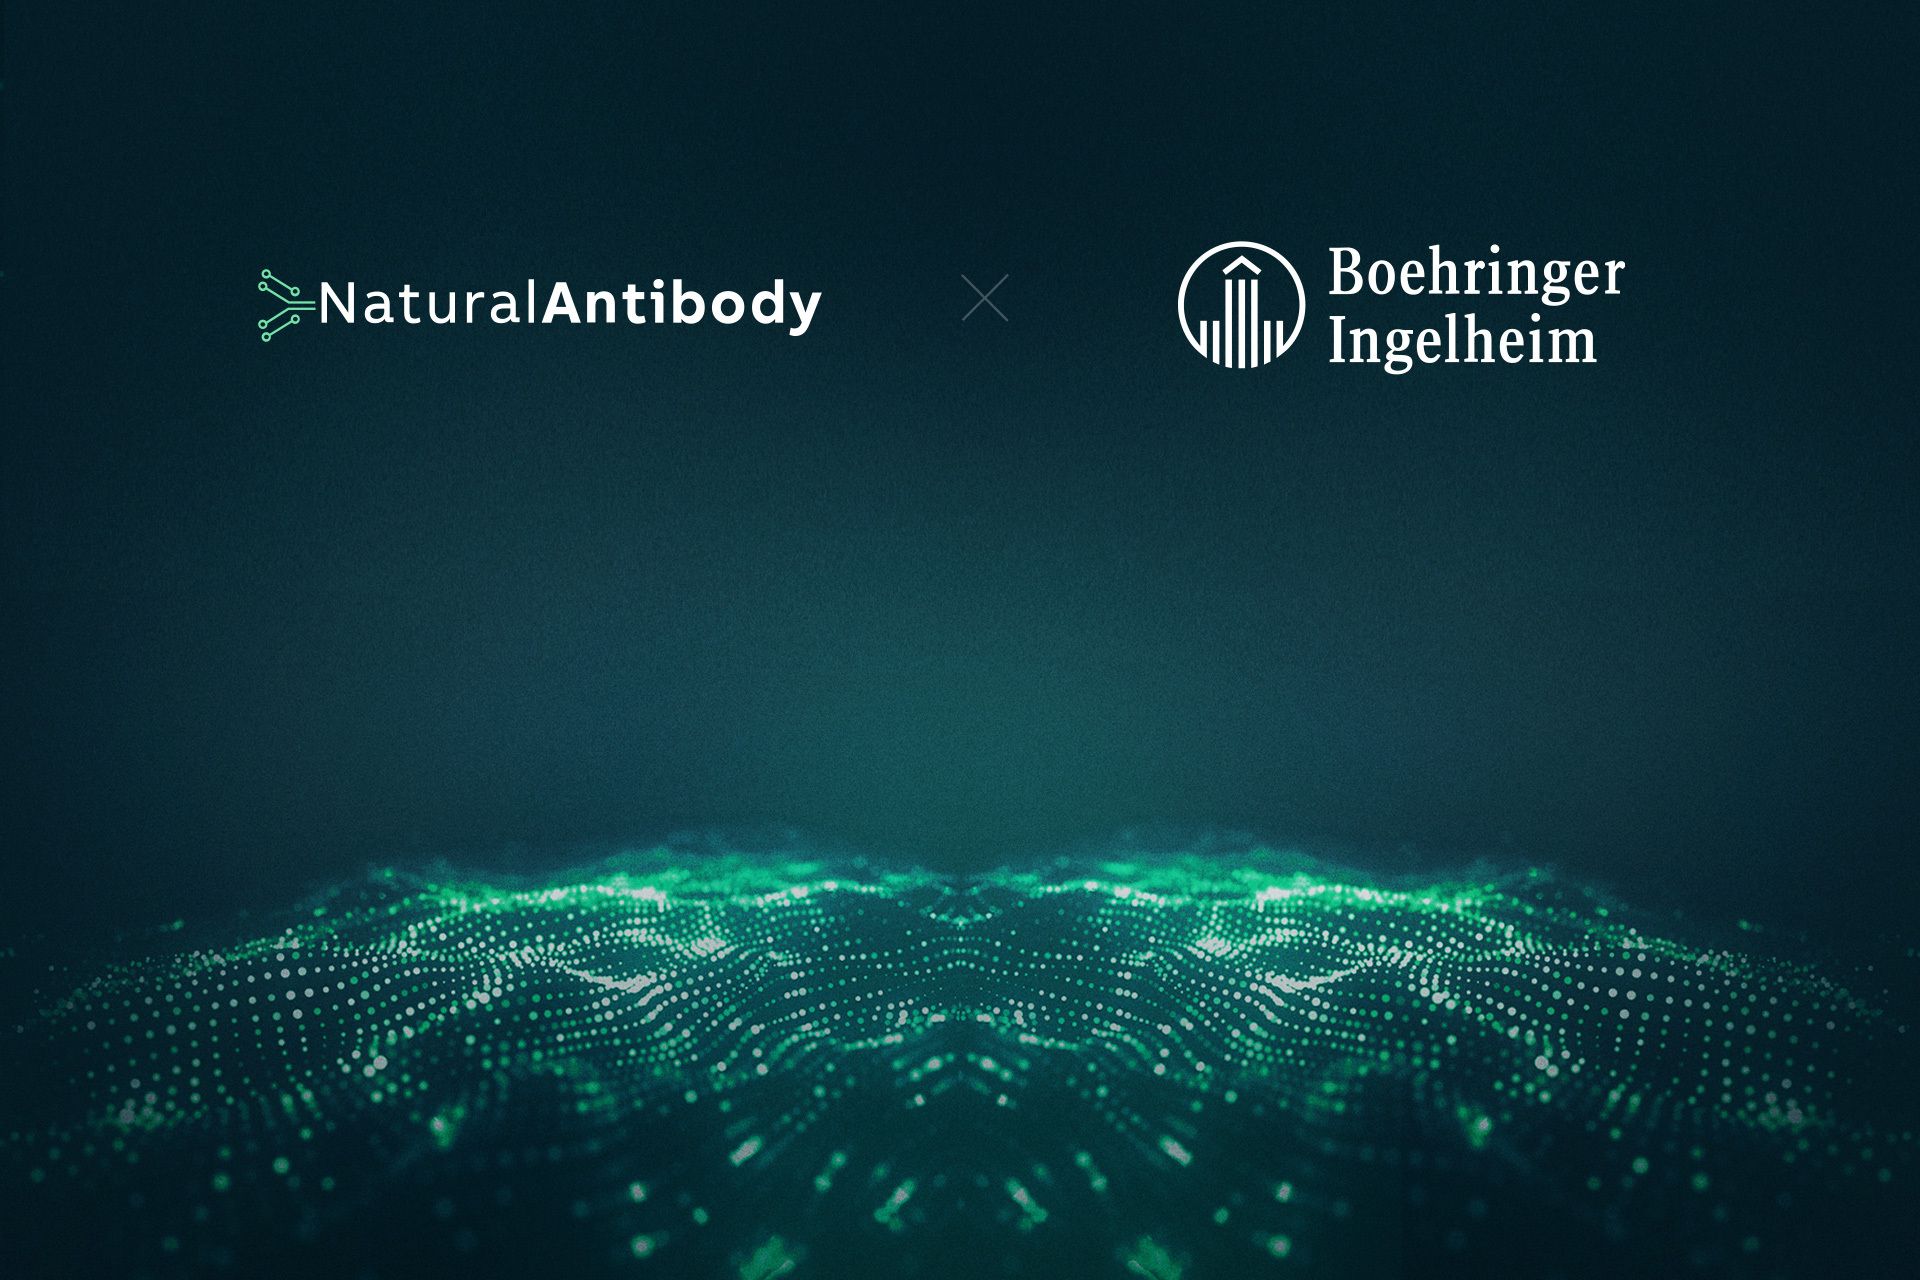 NaturalAntibody collaborates with Boehringer Ingelheim in the Computational Discovery of Therapeutic Antibodies